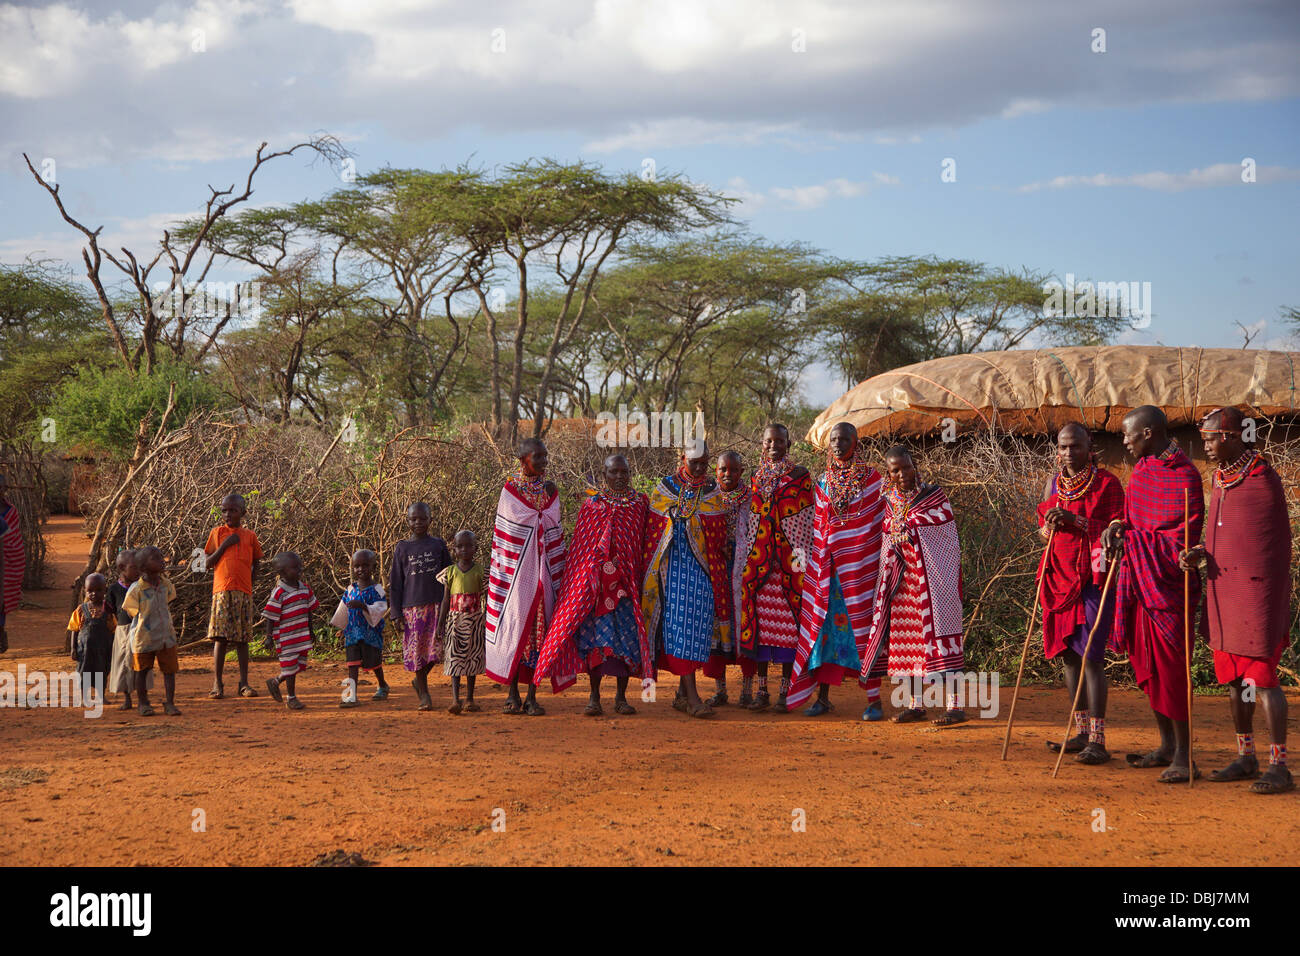 Masai Villagers in traditional clothing outside boma. Ol Kinyei Conservancy area. Kenya, Africa. Stock Photo